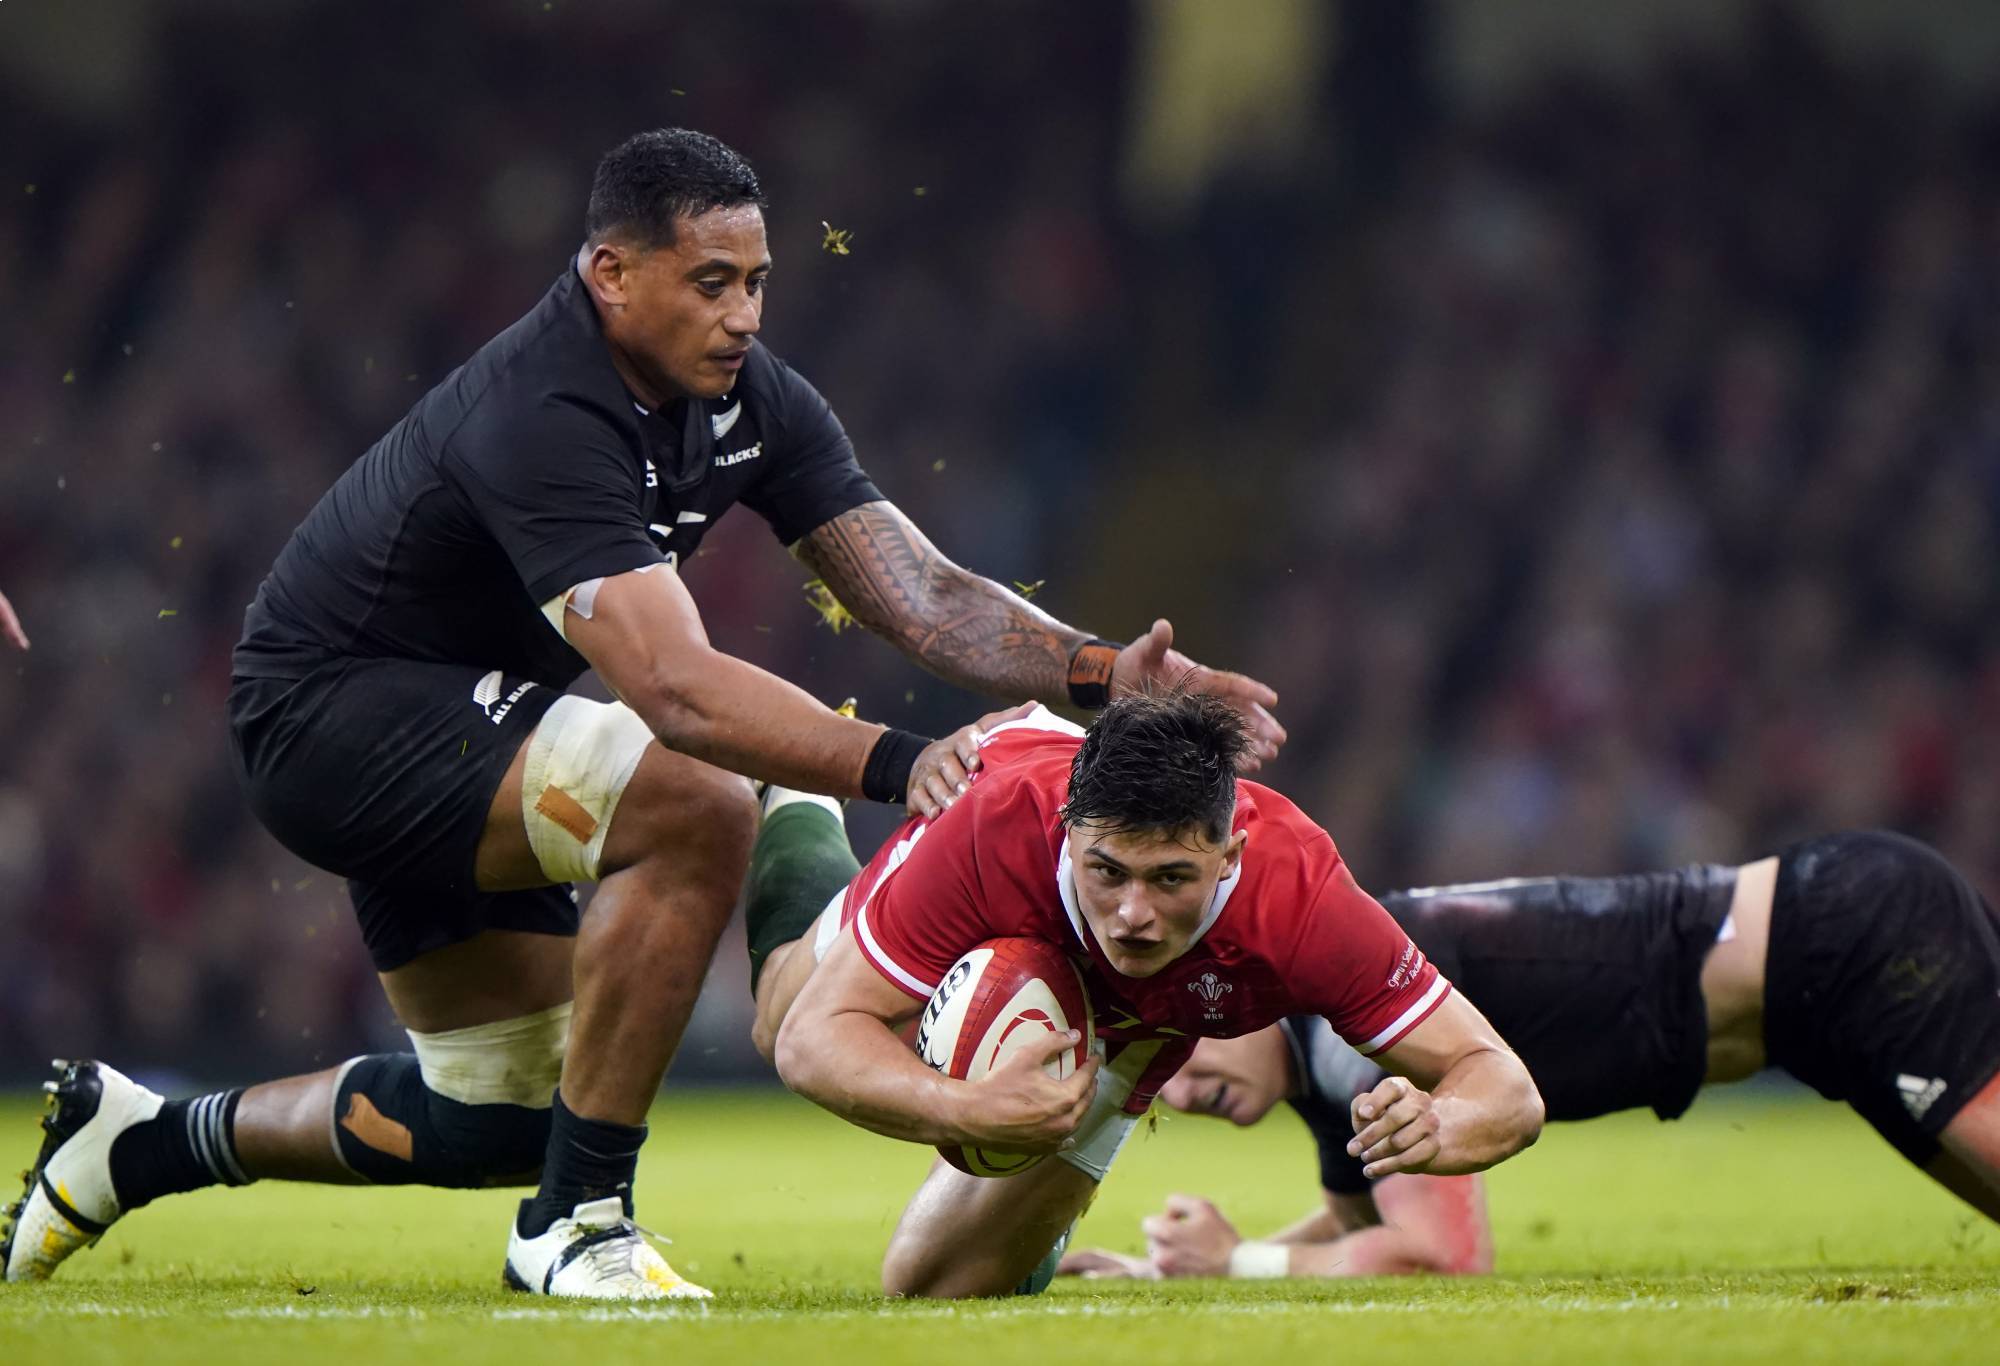 Wales' Louis Rees-Zammit tackled by New Zealand's Shannon Frizell during the Autumn International match at the Principality Stadium, Cardiff. Picture date: Saturday November 5, 2022. (Photo by Joe Giddens/PA Images via Getty Images)